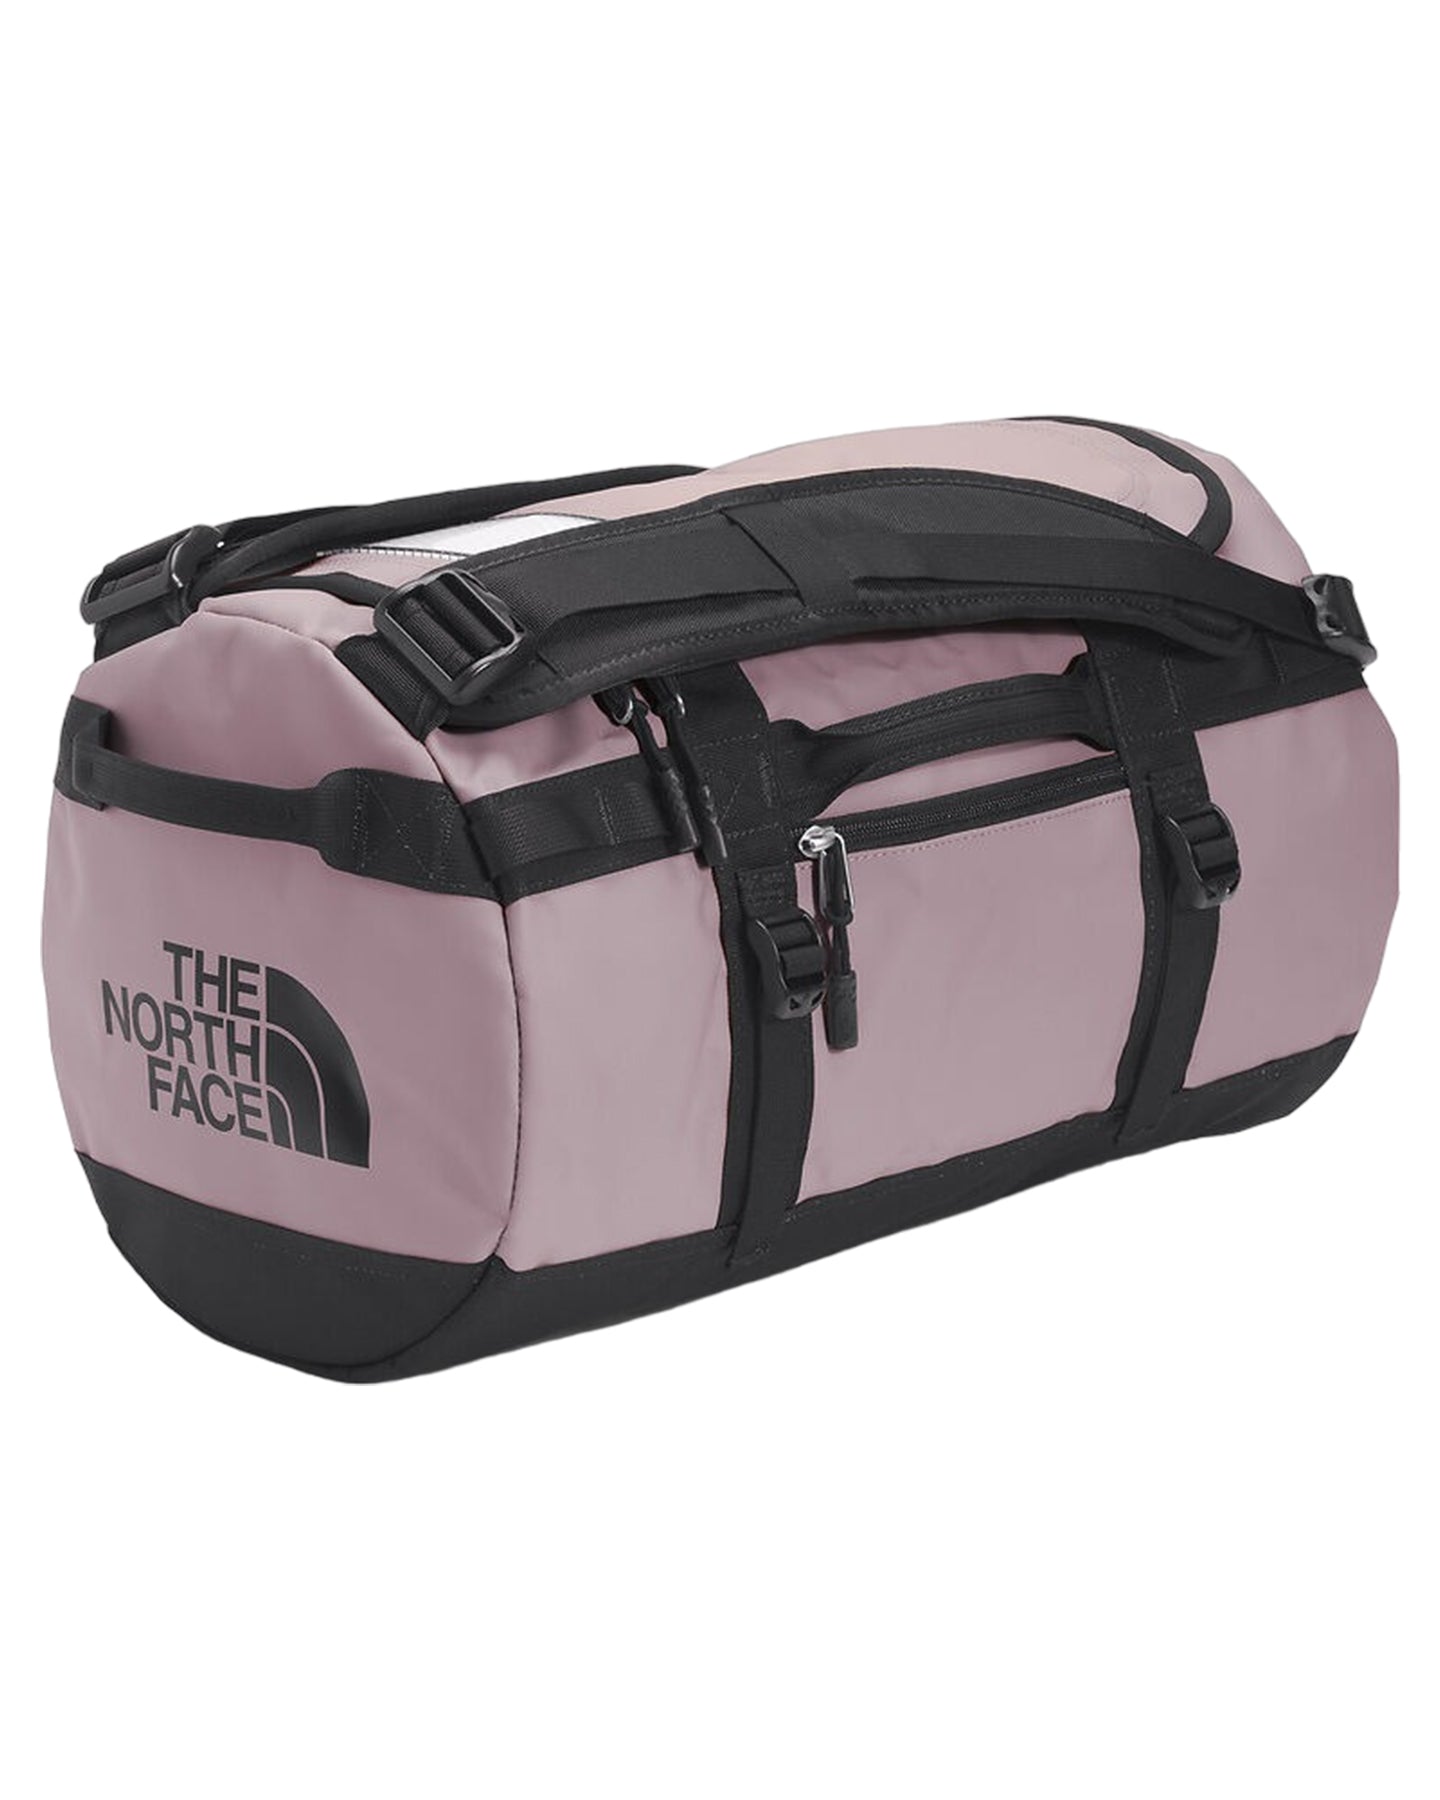 The North Face Base Camp Duffel XS - Fawn Grey/Tnf Black Luggage Bags - SnowSkiersWarehouse